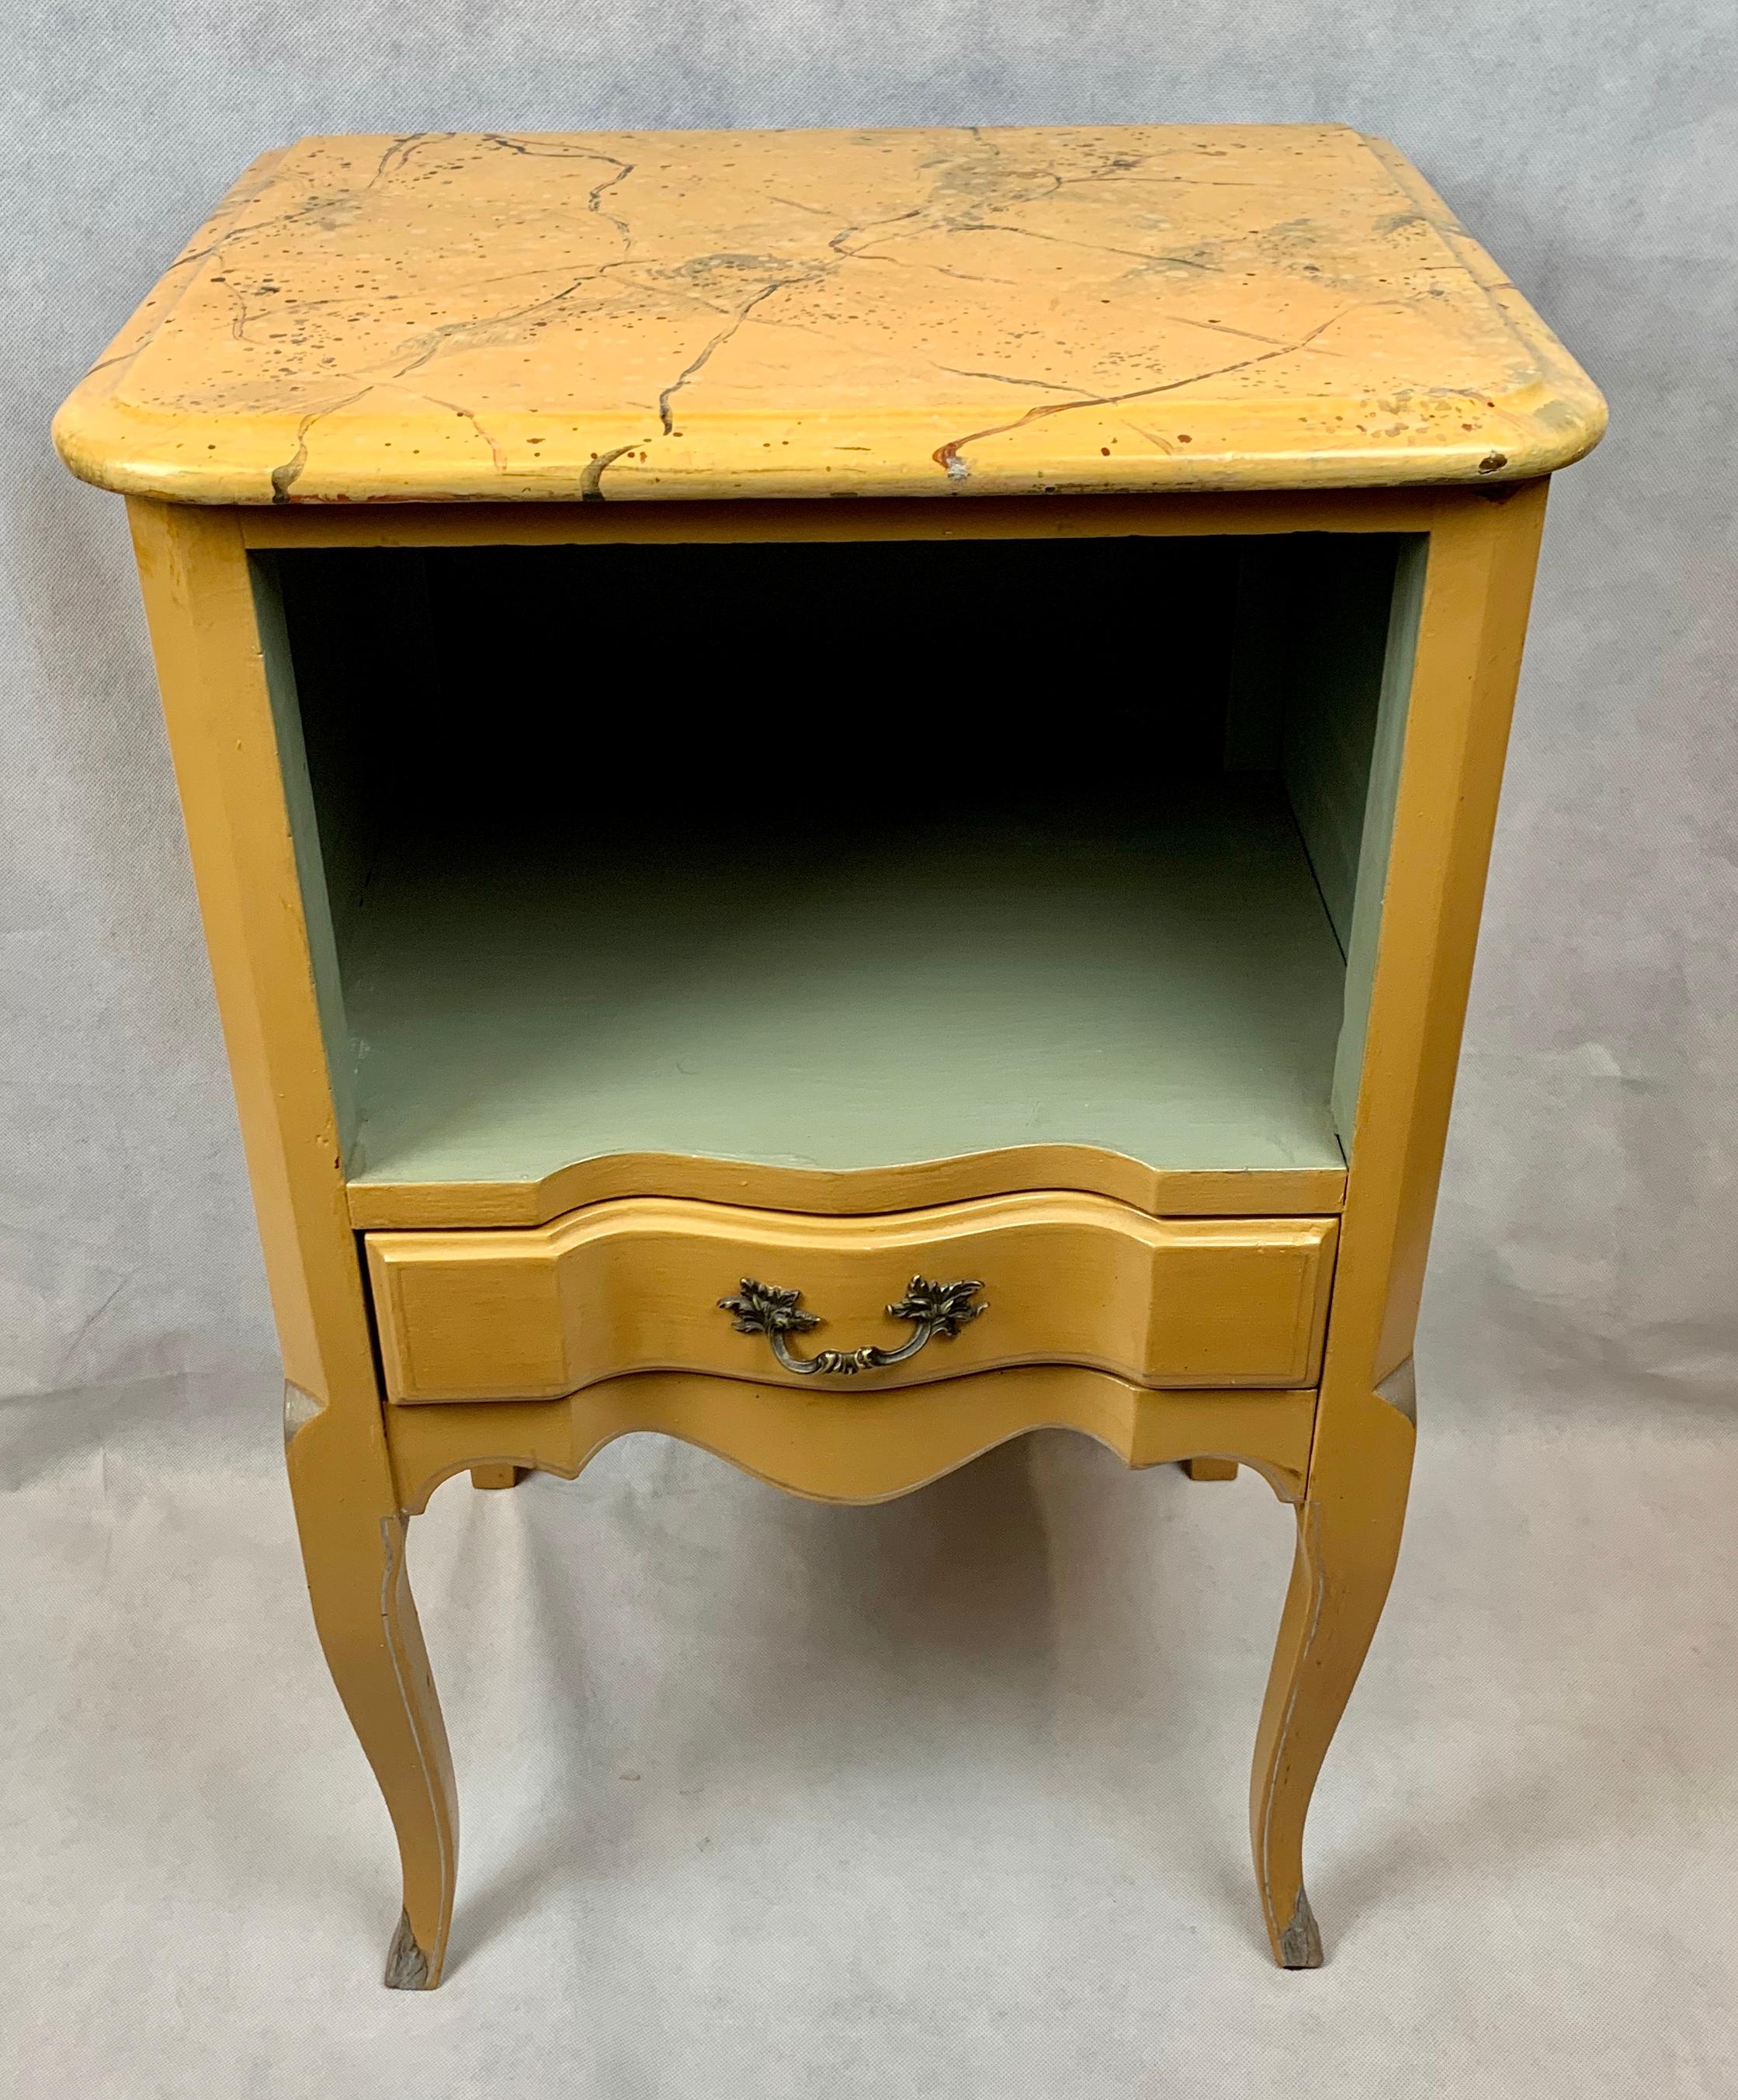 Louis XV style occasional or end table with a drawer.   This hardwood table in yellow paint has a faux marble top.  There is an open space for books or decorative objects. The drawer below has a brass pull. The legs are cabriole style, typical of